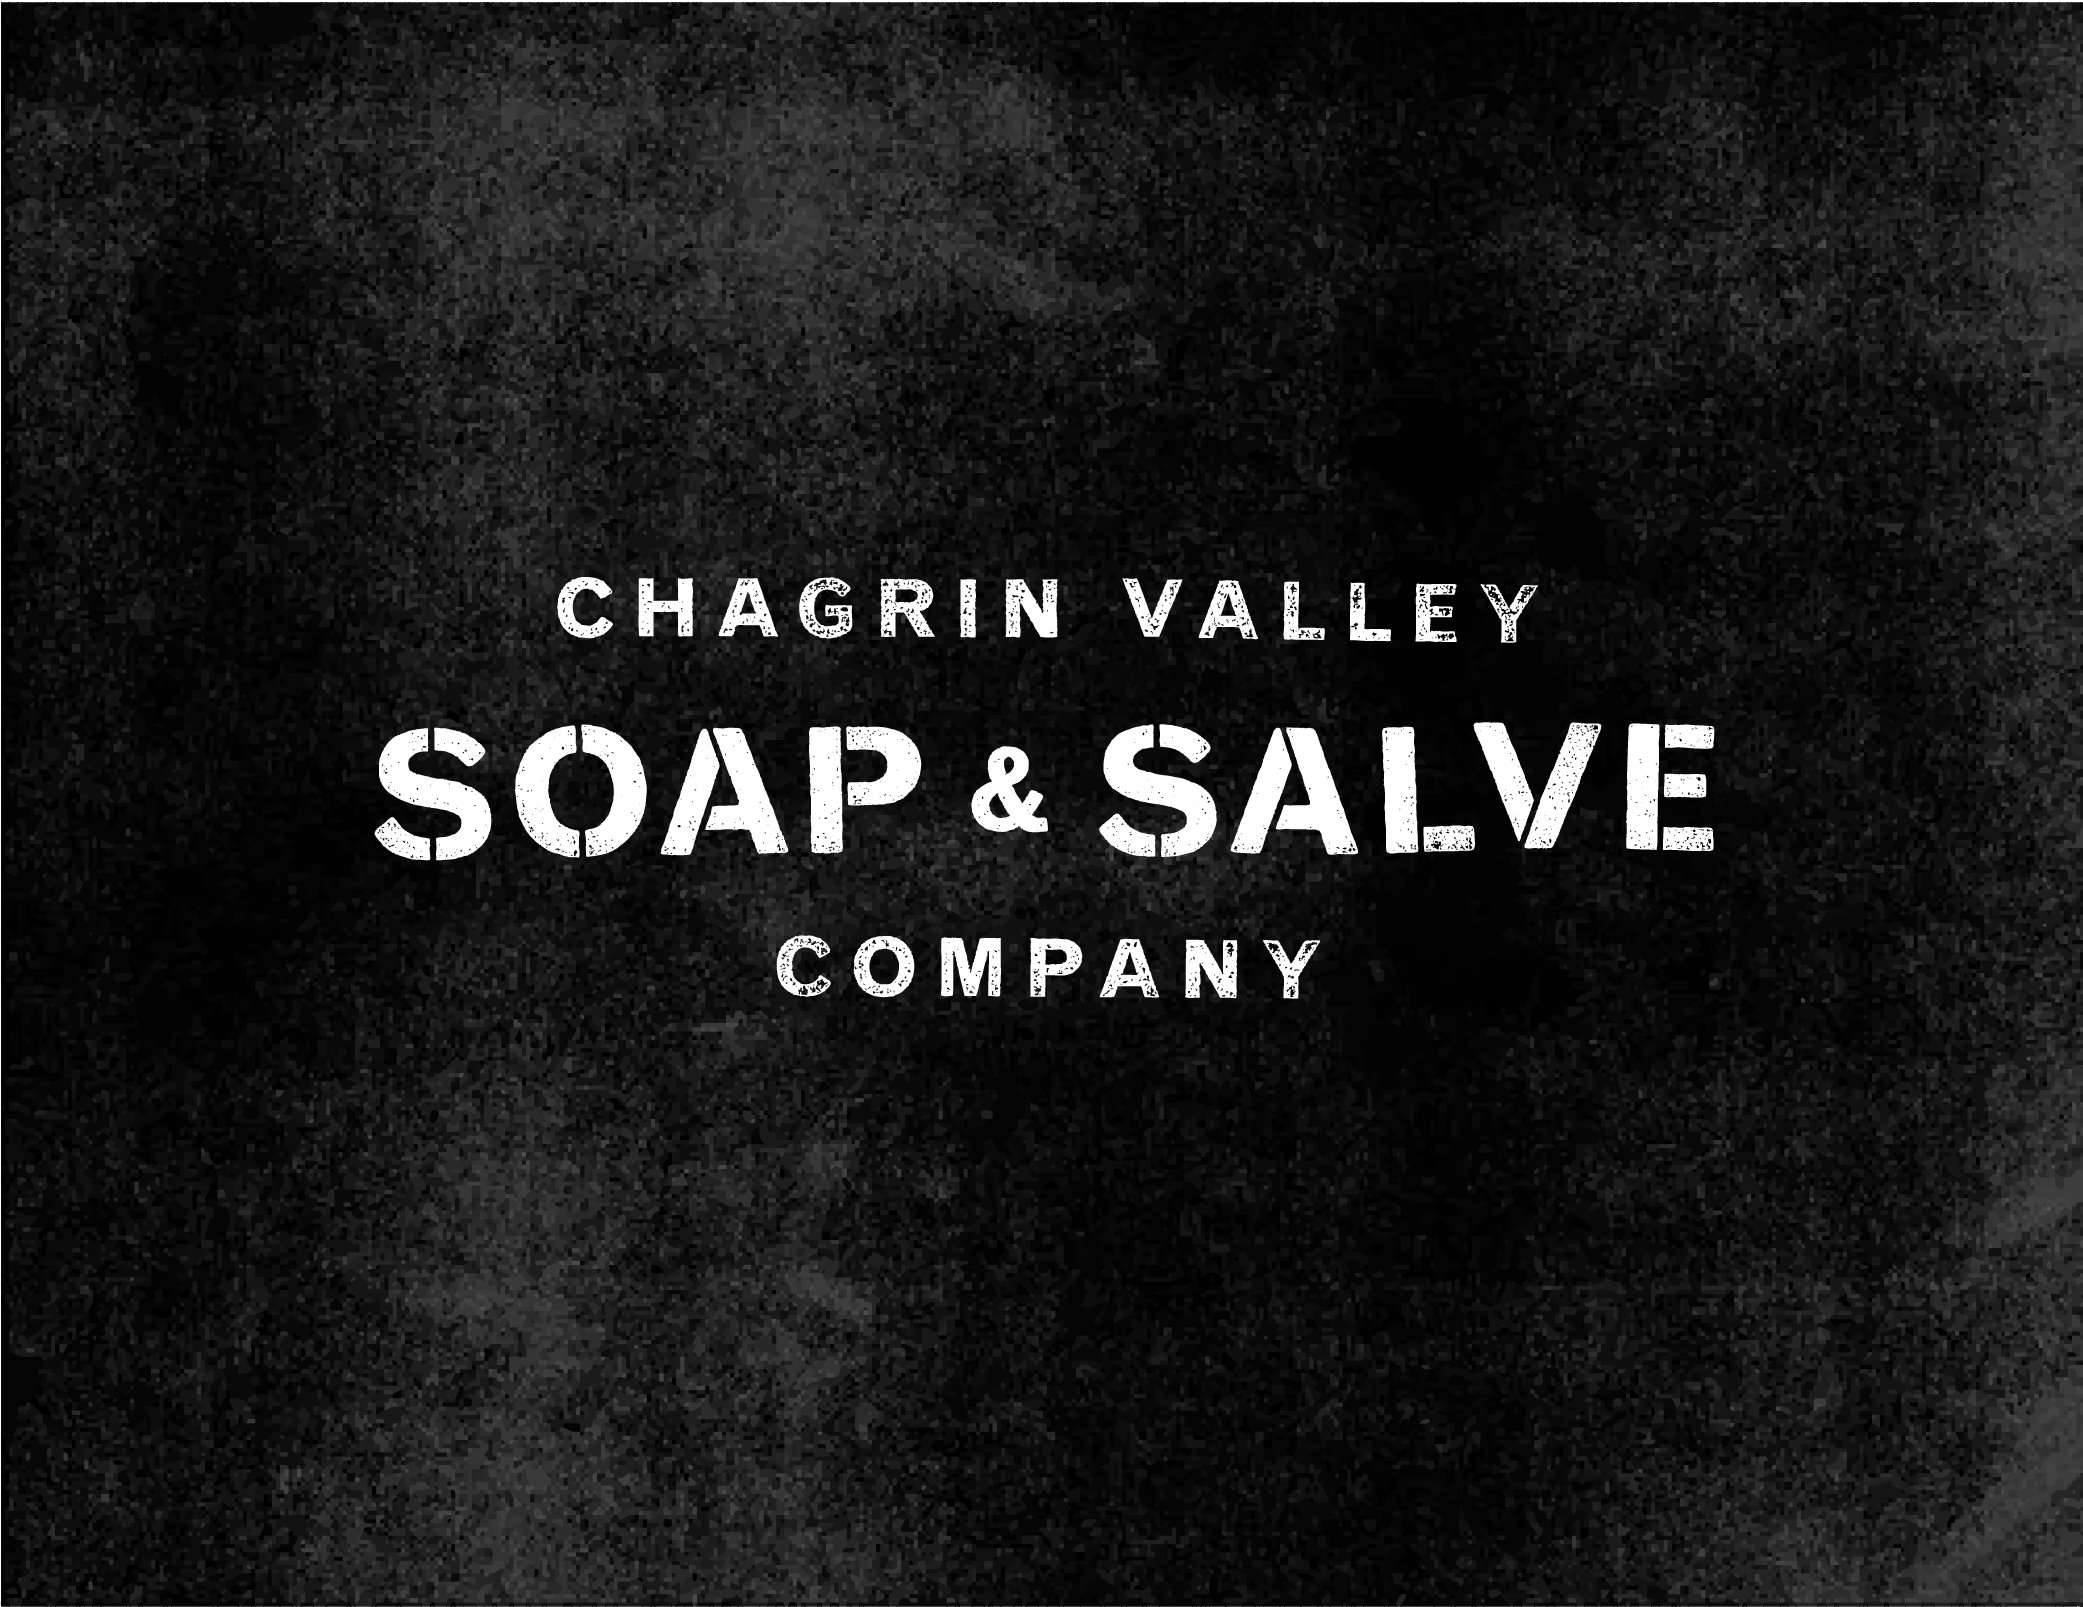 Chagrin Valley Soap and Salve.jpg